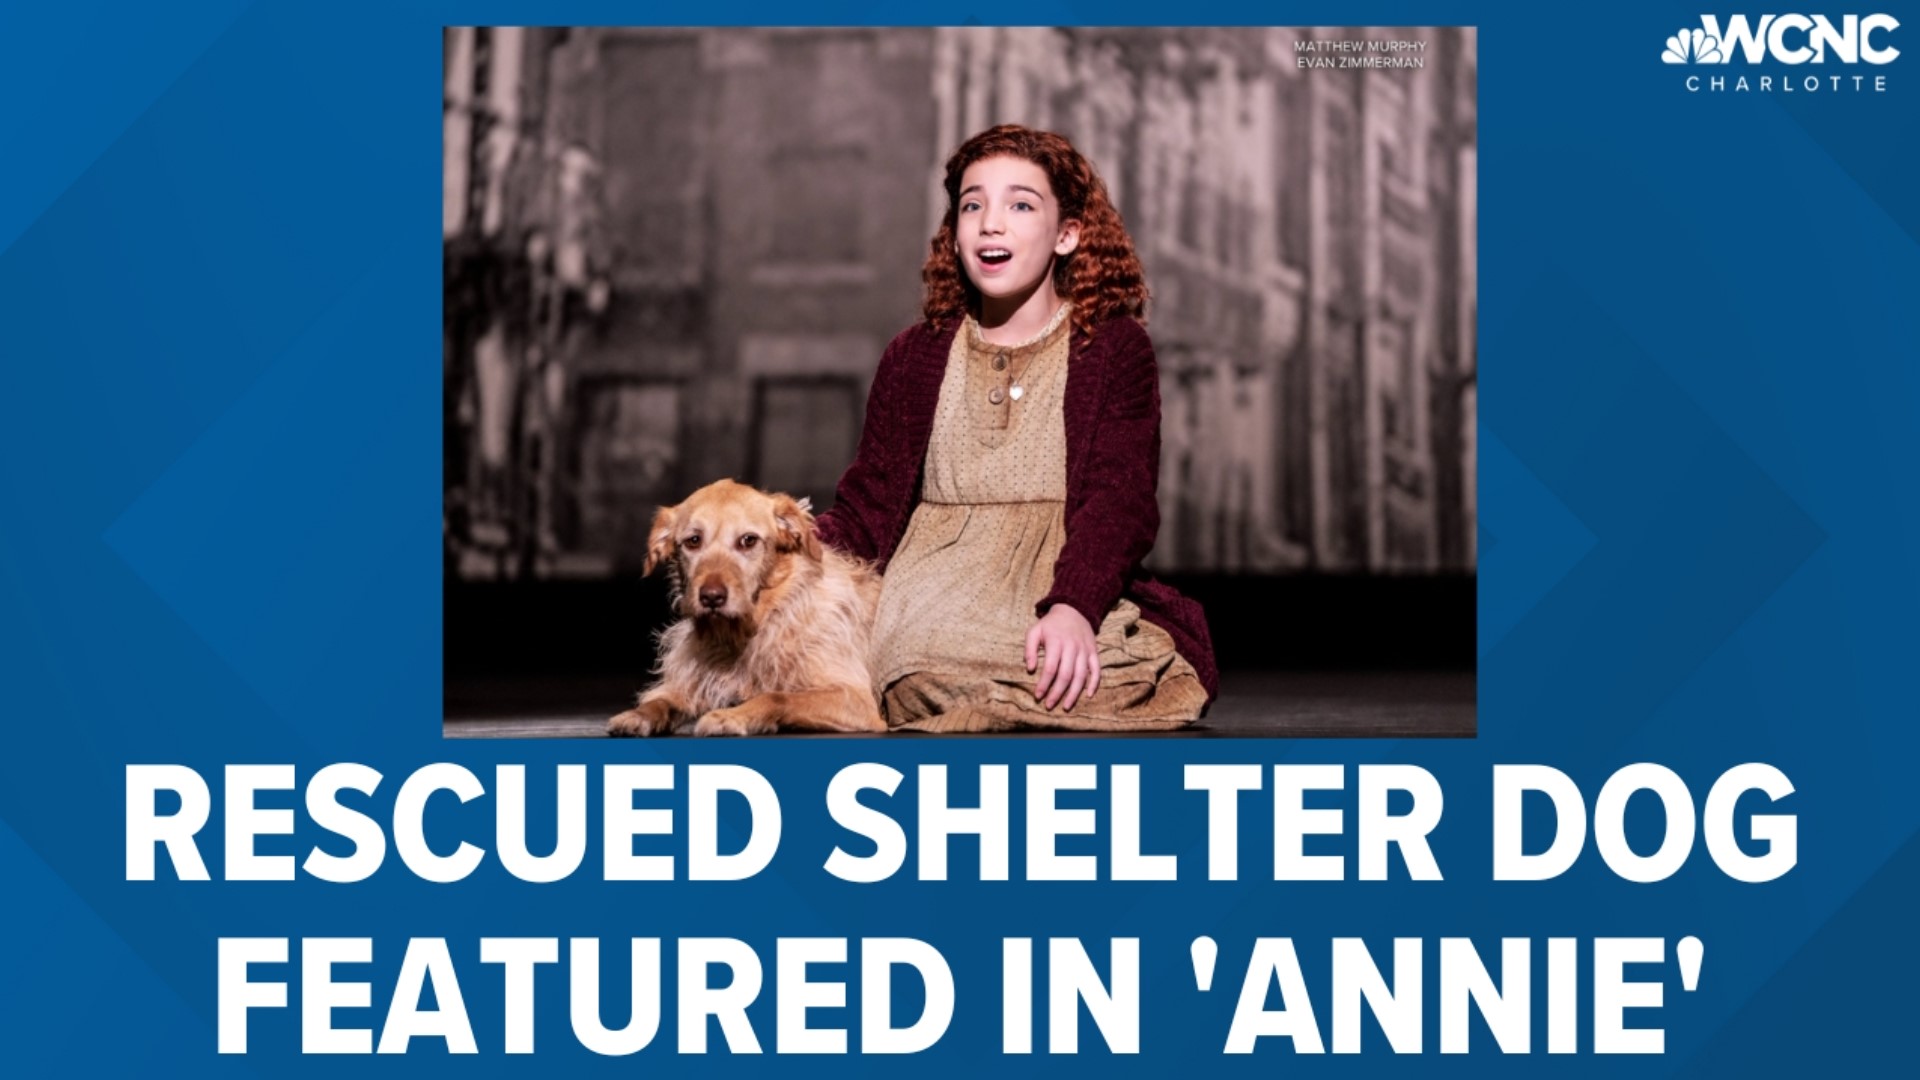 Dogs playing the beloved Sandy character in the national tour have traditionally been rescued shelter dogs.